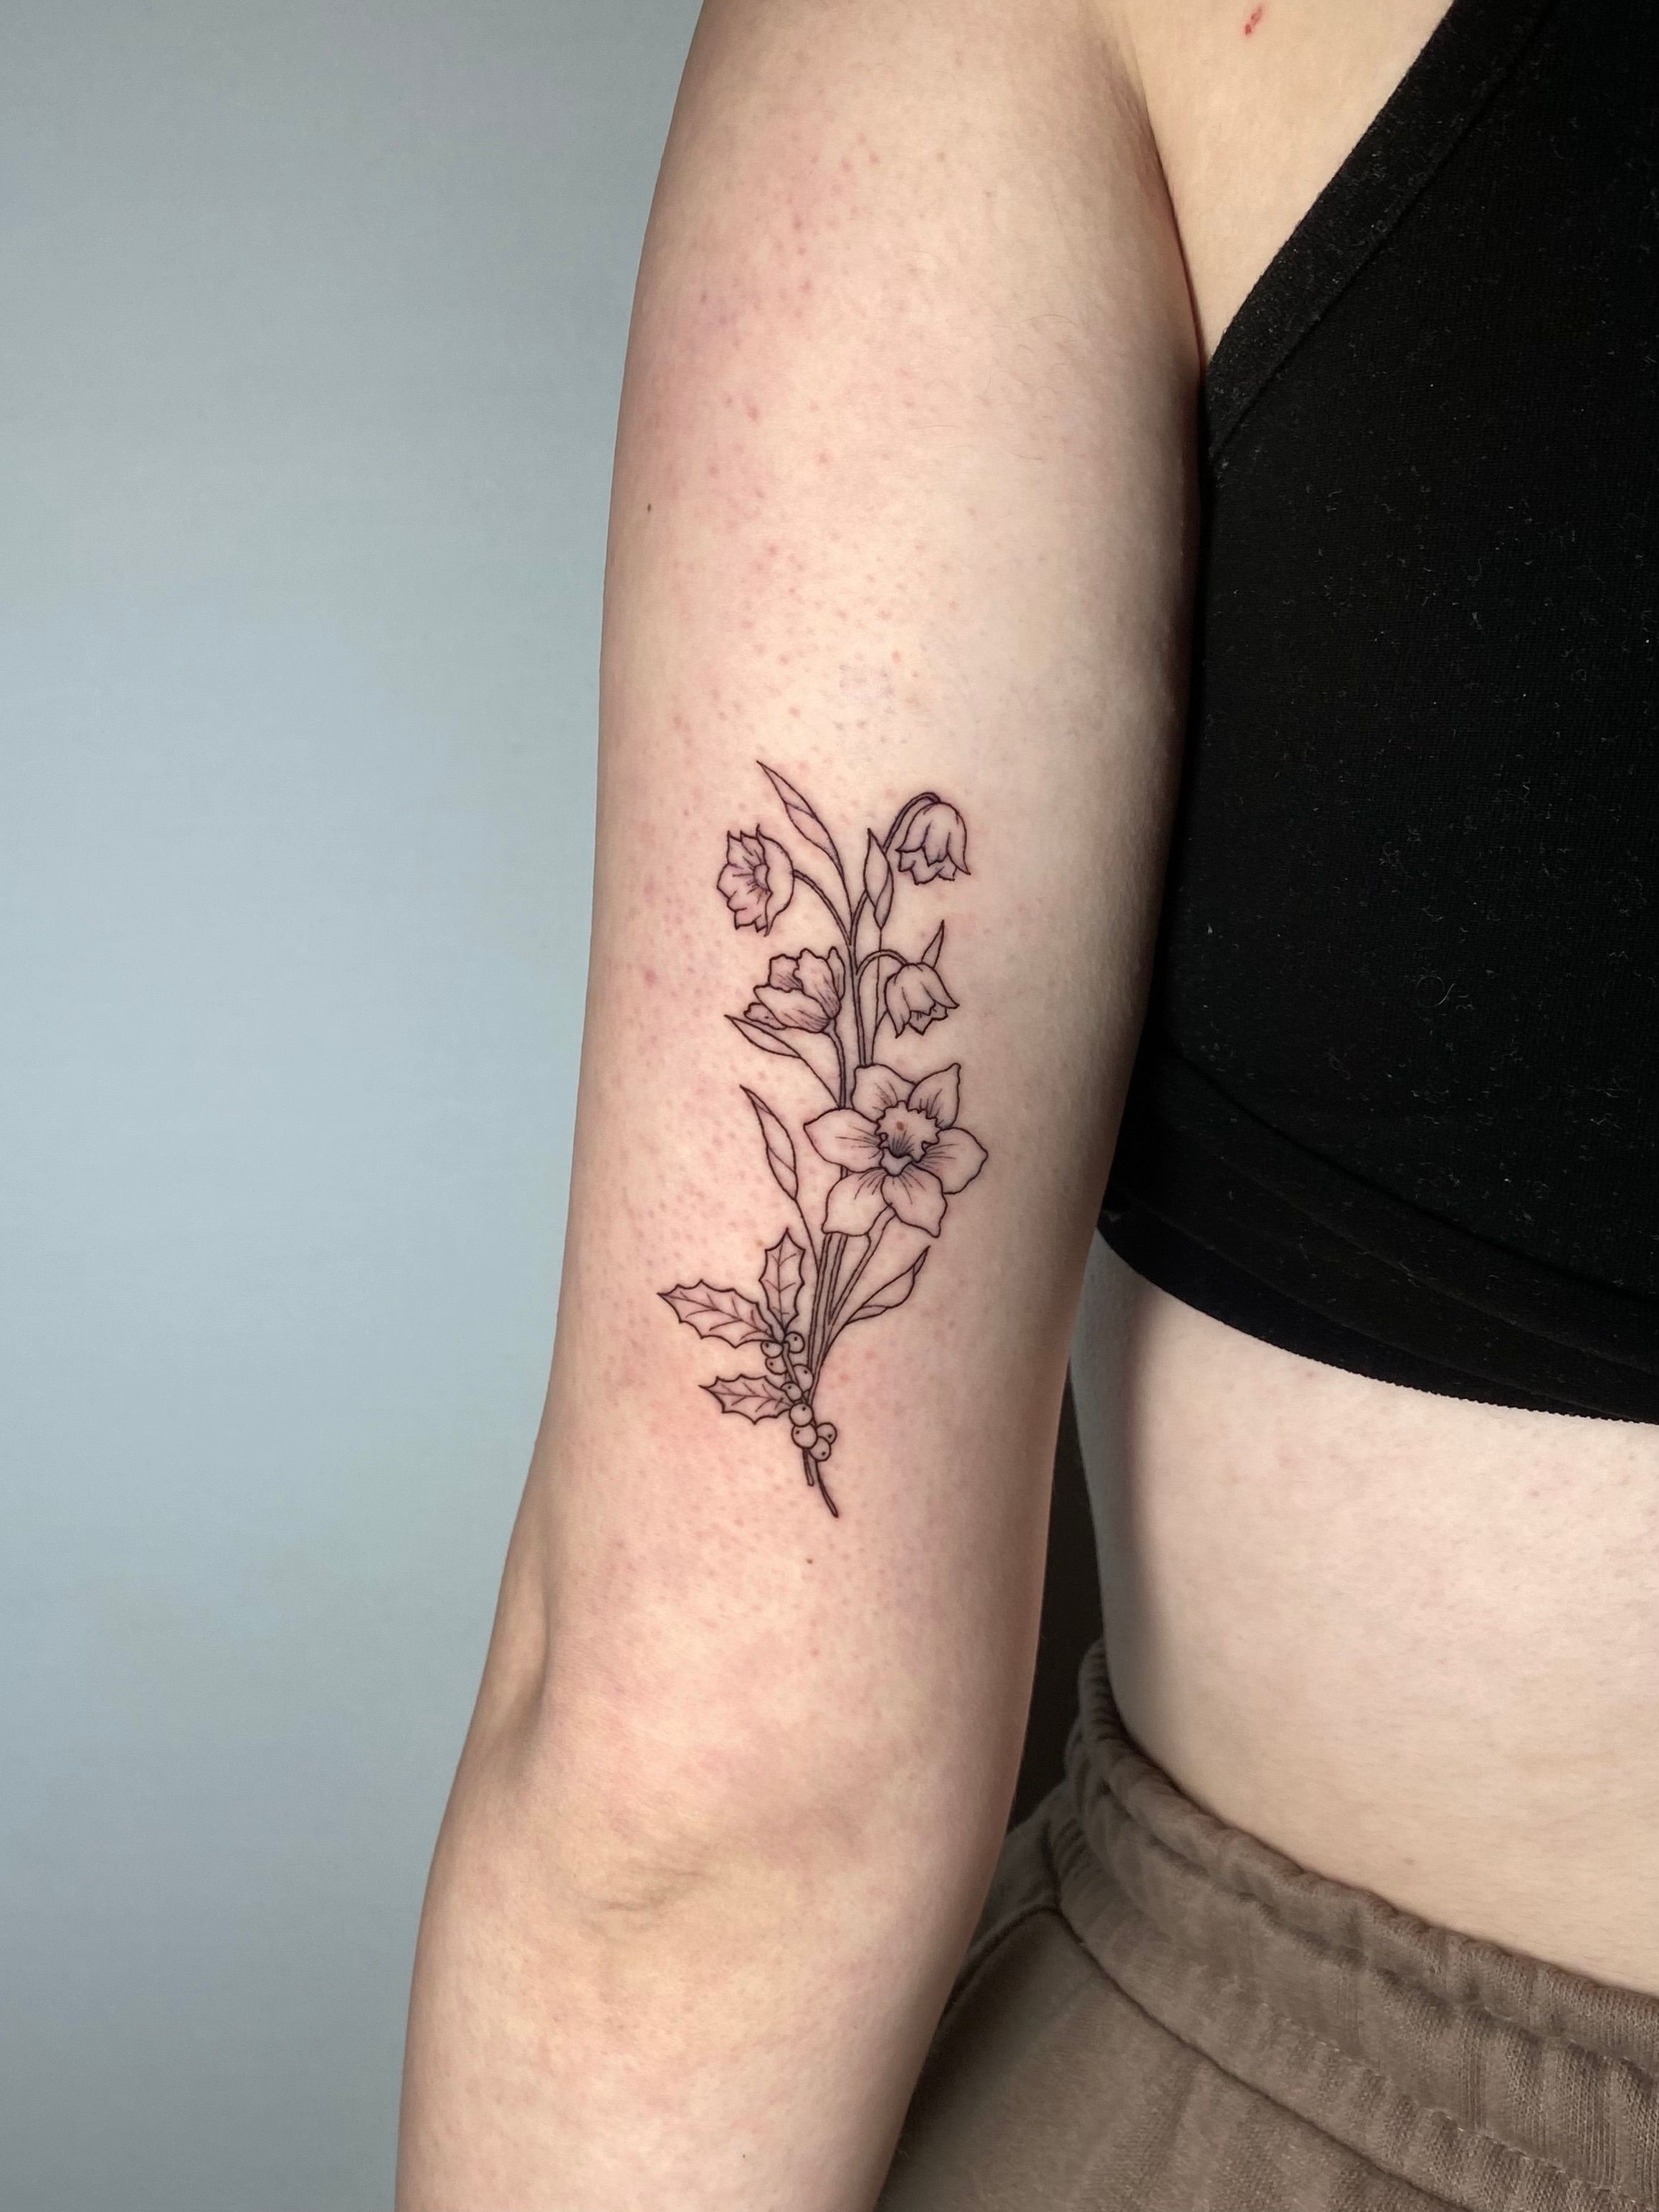 15 Of The Smallest, Most Tasteful Flower Tattoos